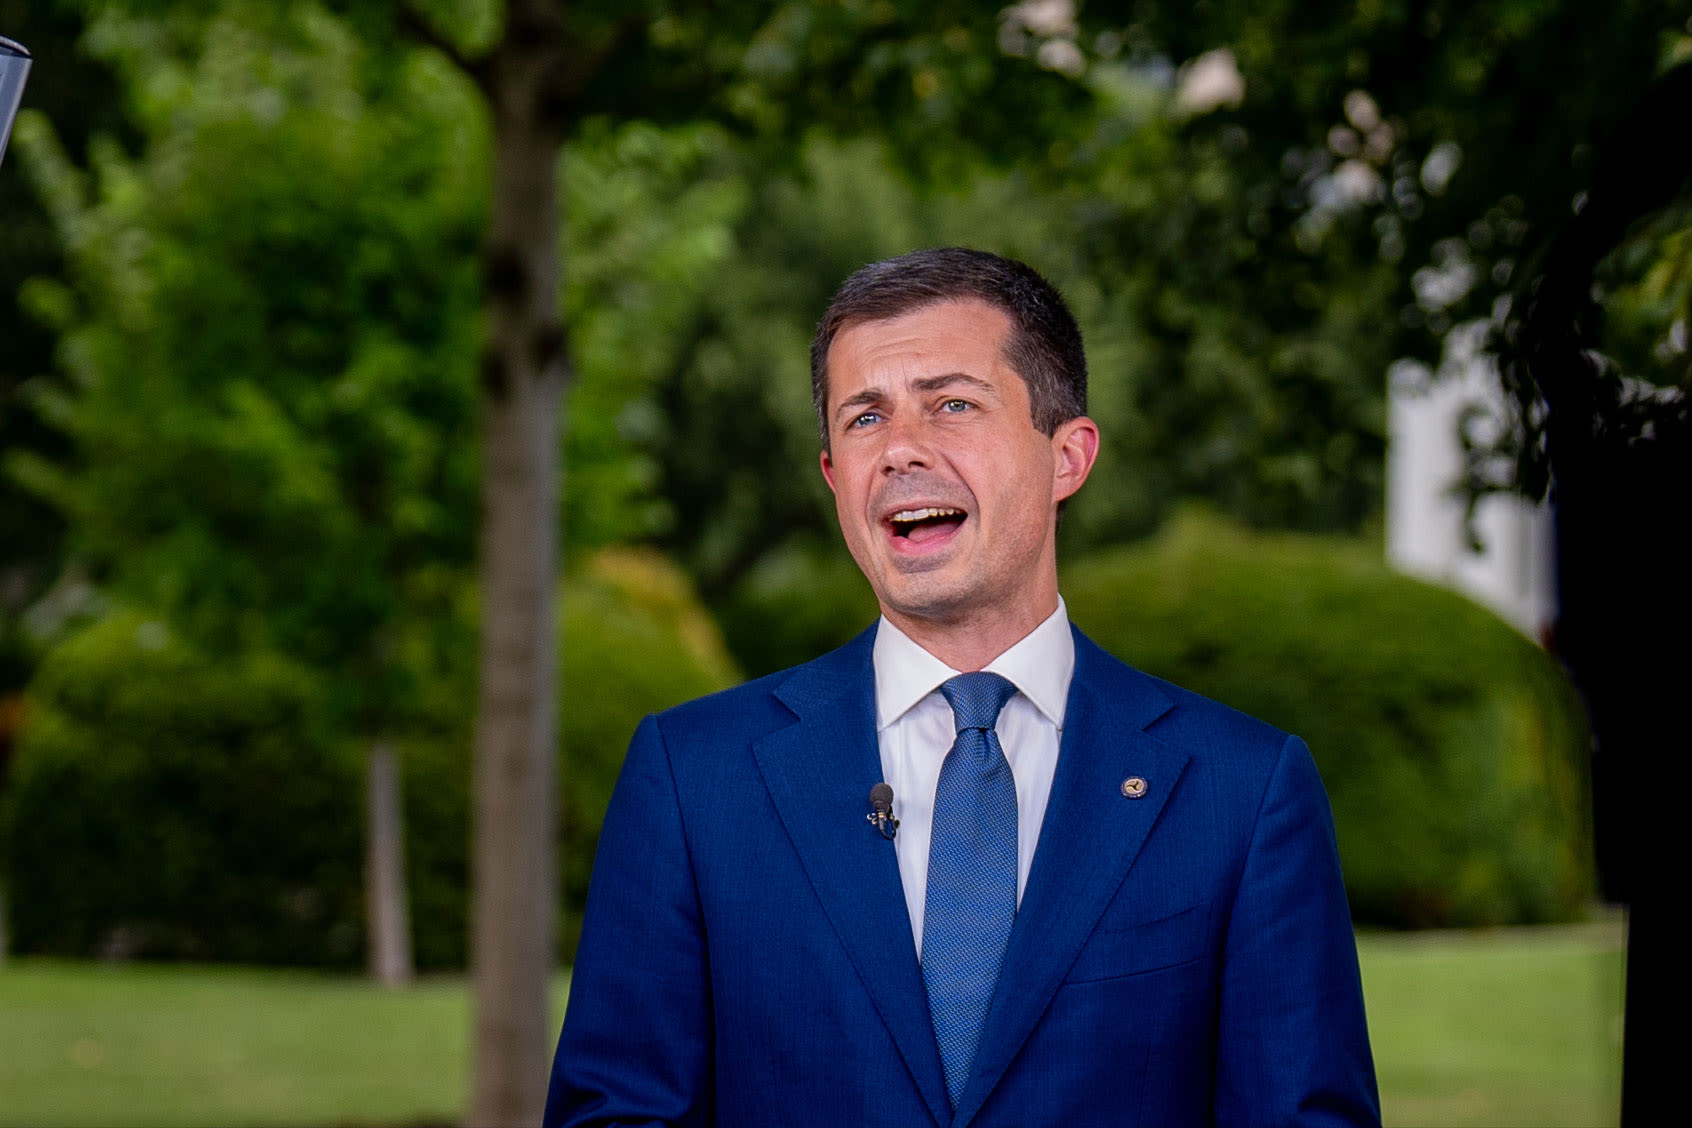 Buttigieg says Republicans live in a "warped reality," accuses party of being a pro-Trump "cult"